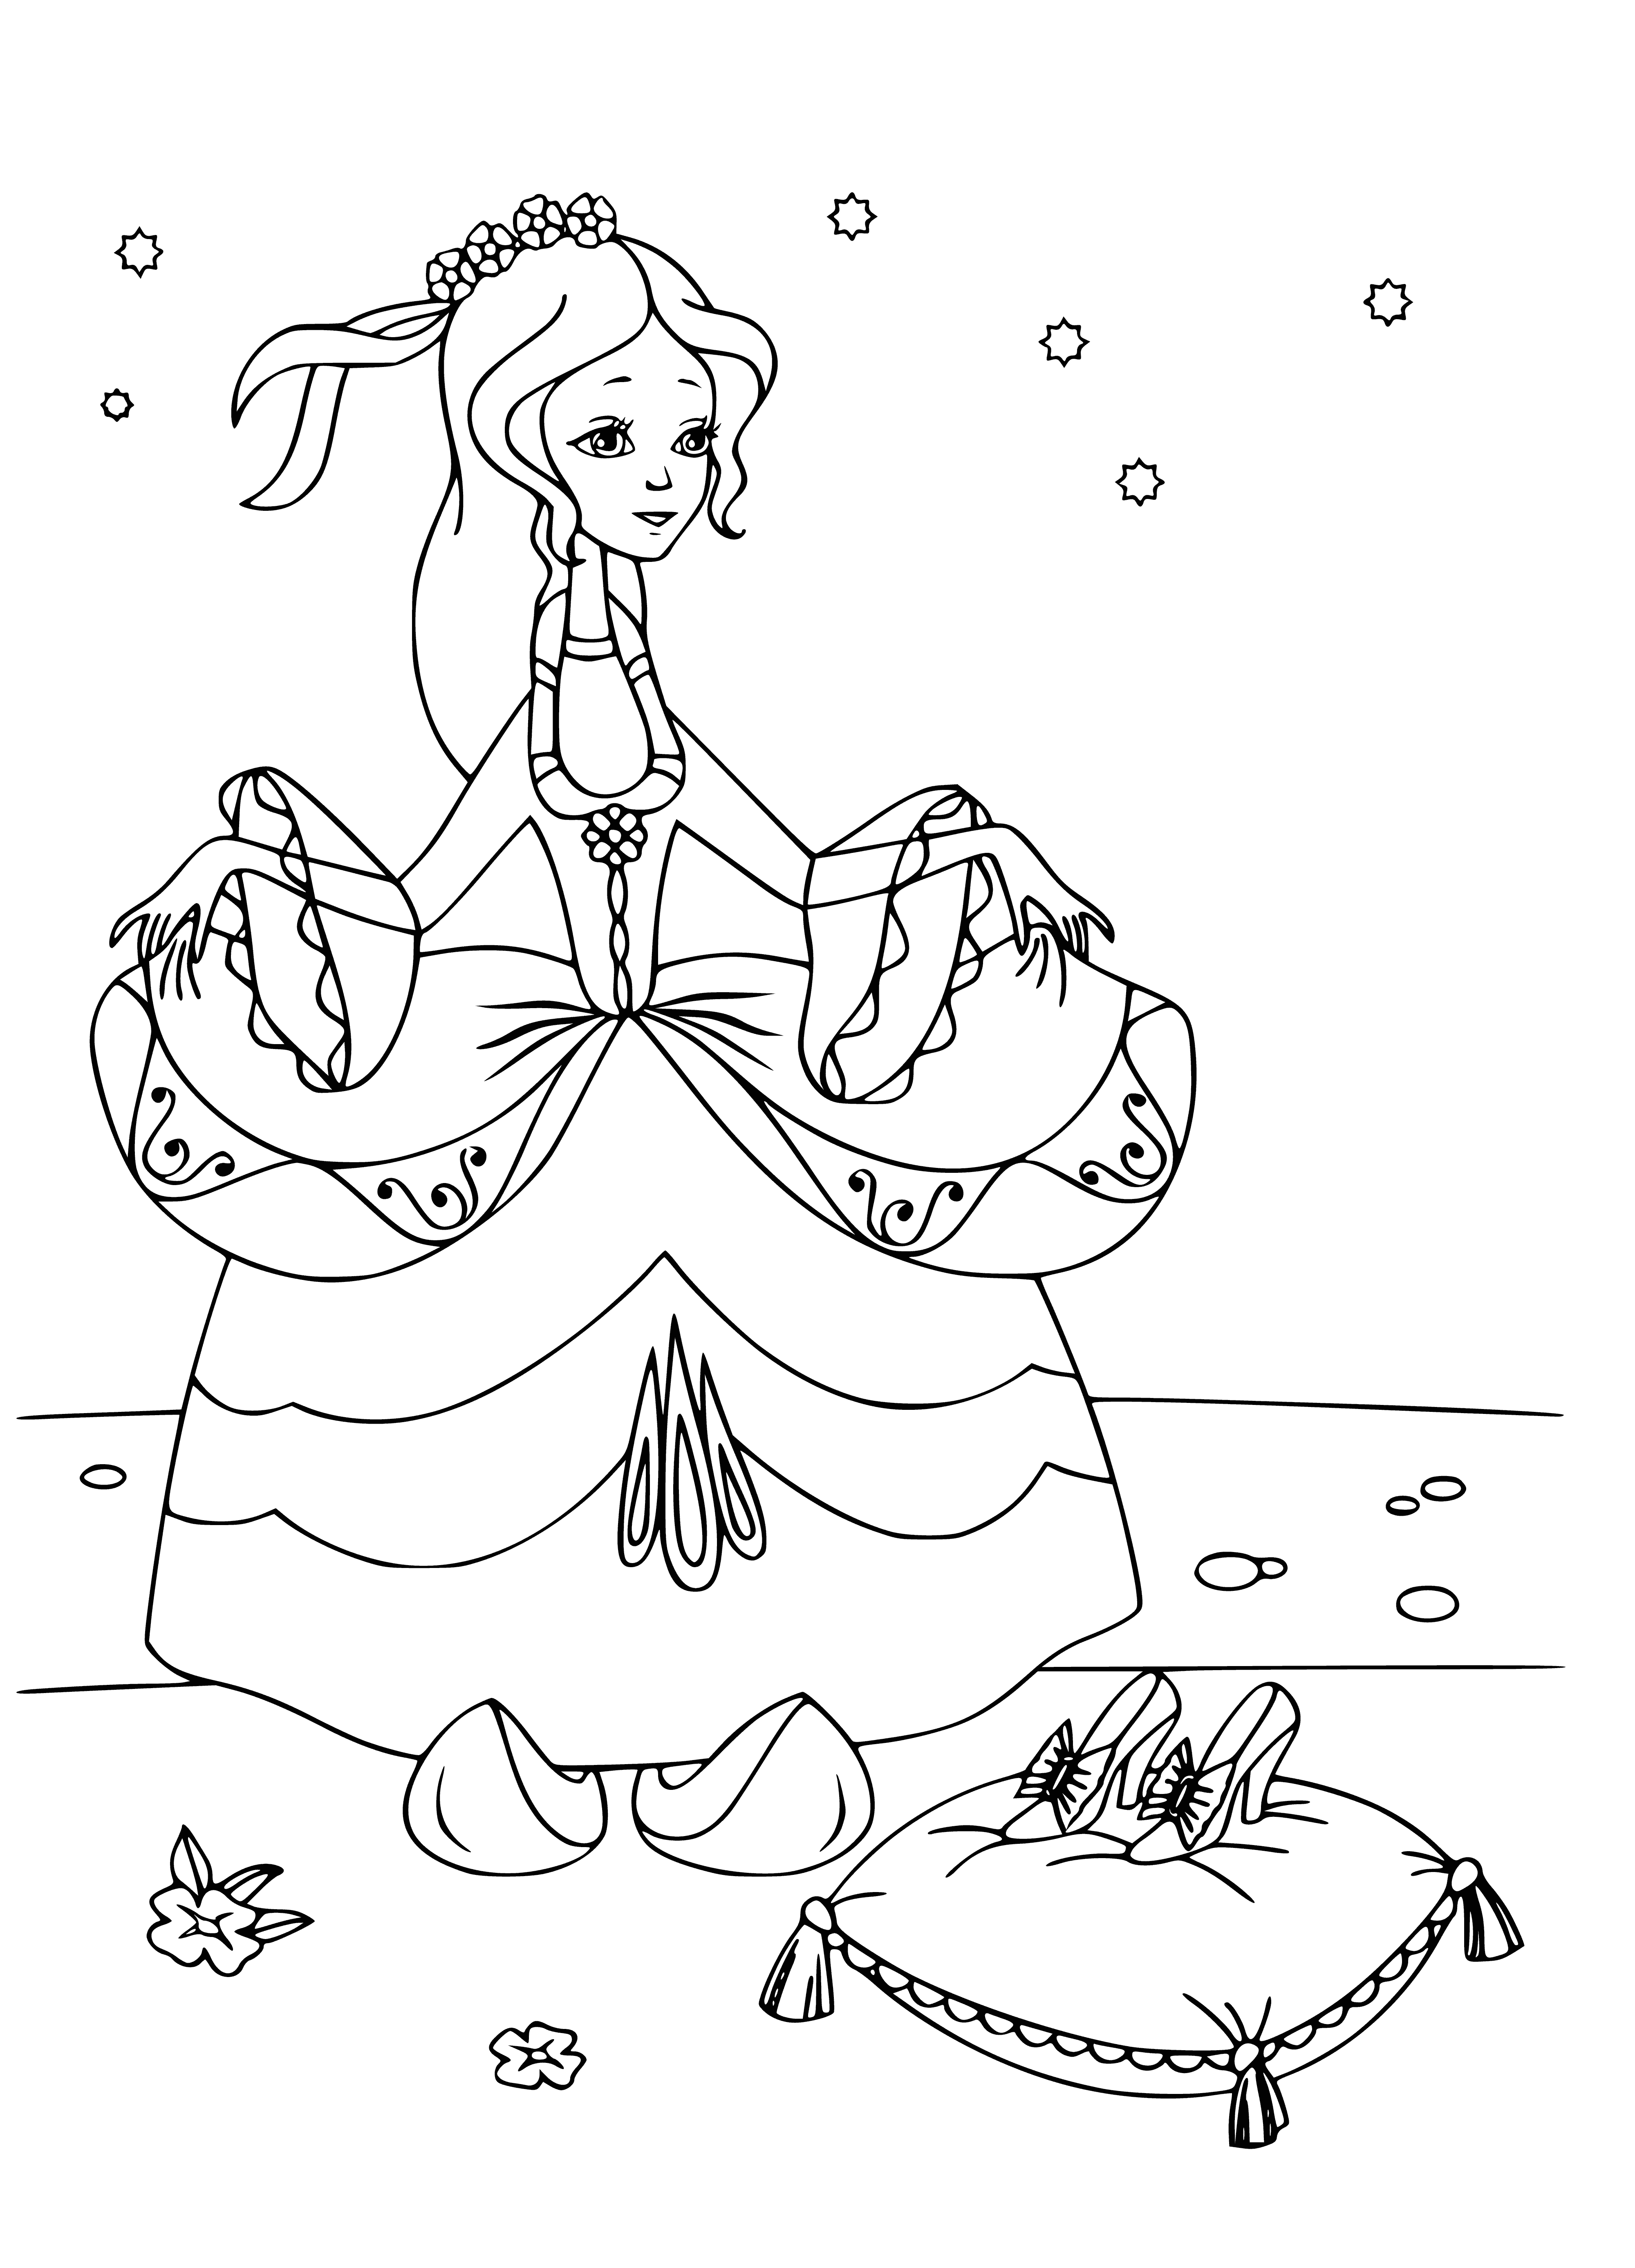 coloring page: Cinderella shines in a blue dress and glass slippers, with a pretty updo and a fairy godmother in the background. #CinderellaMyth